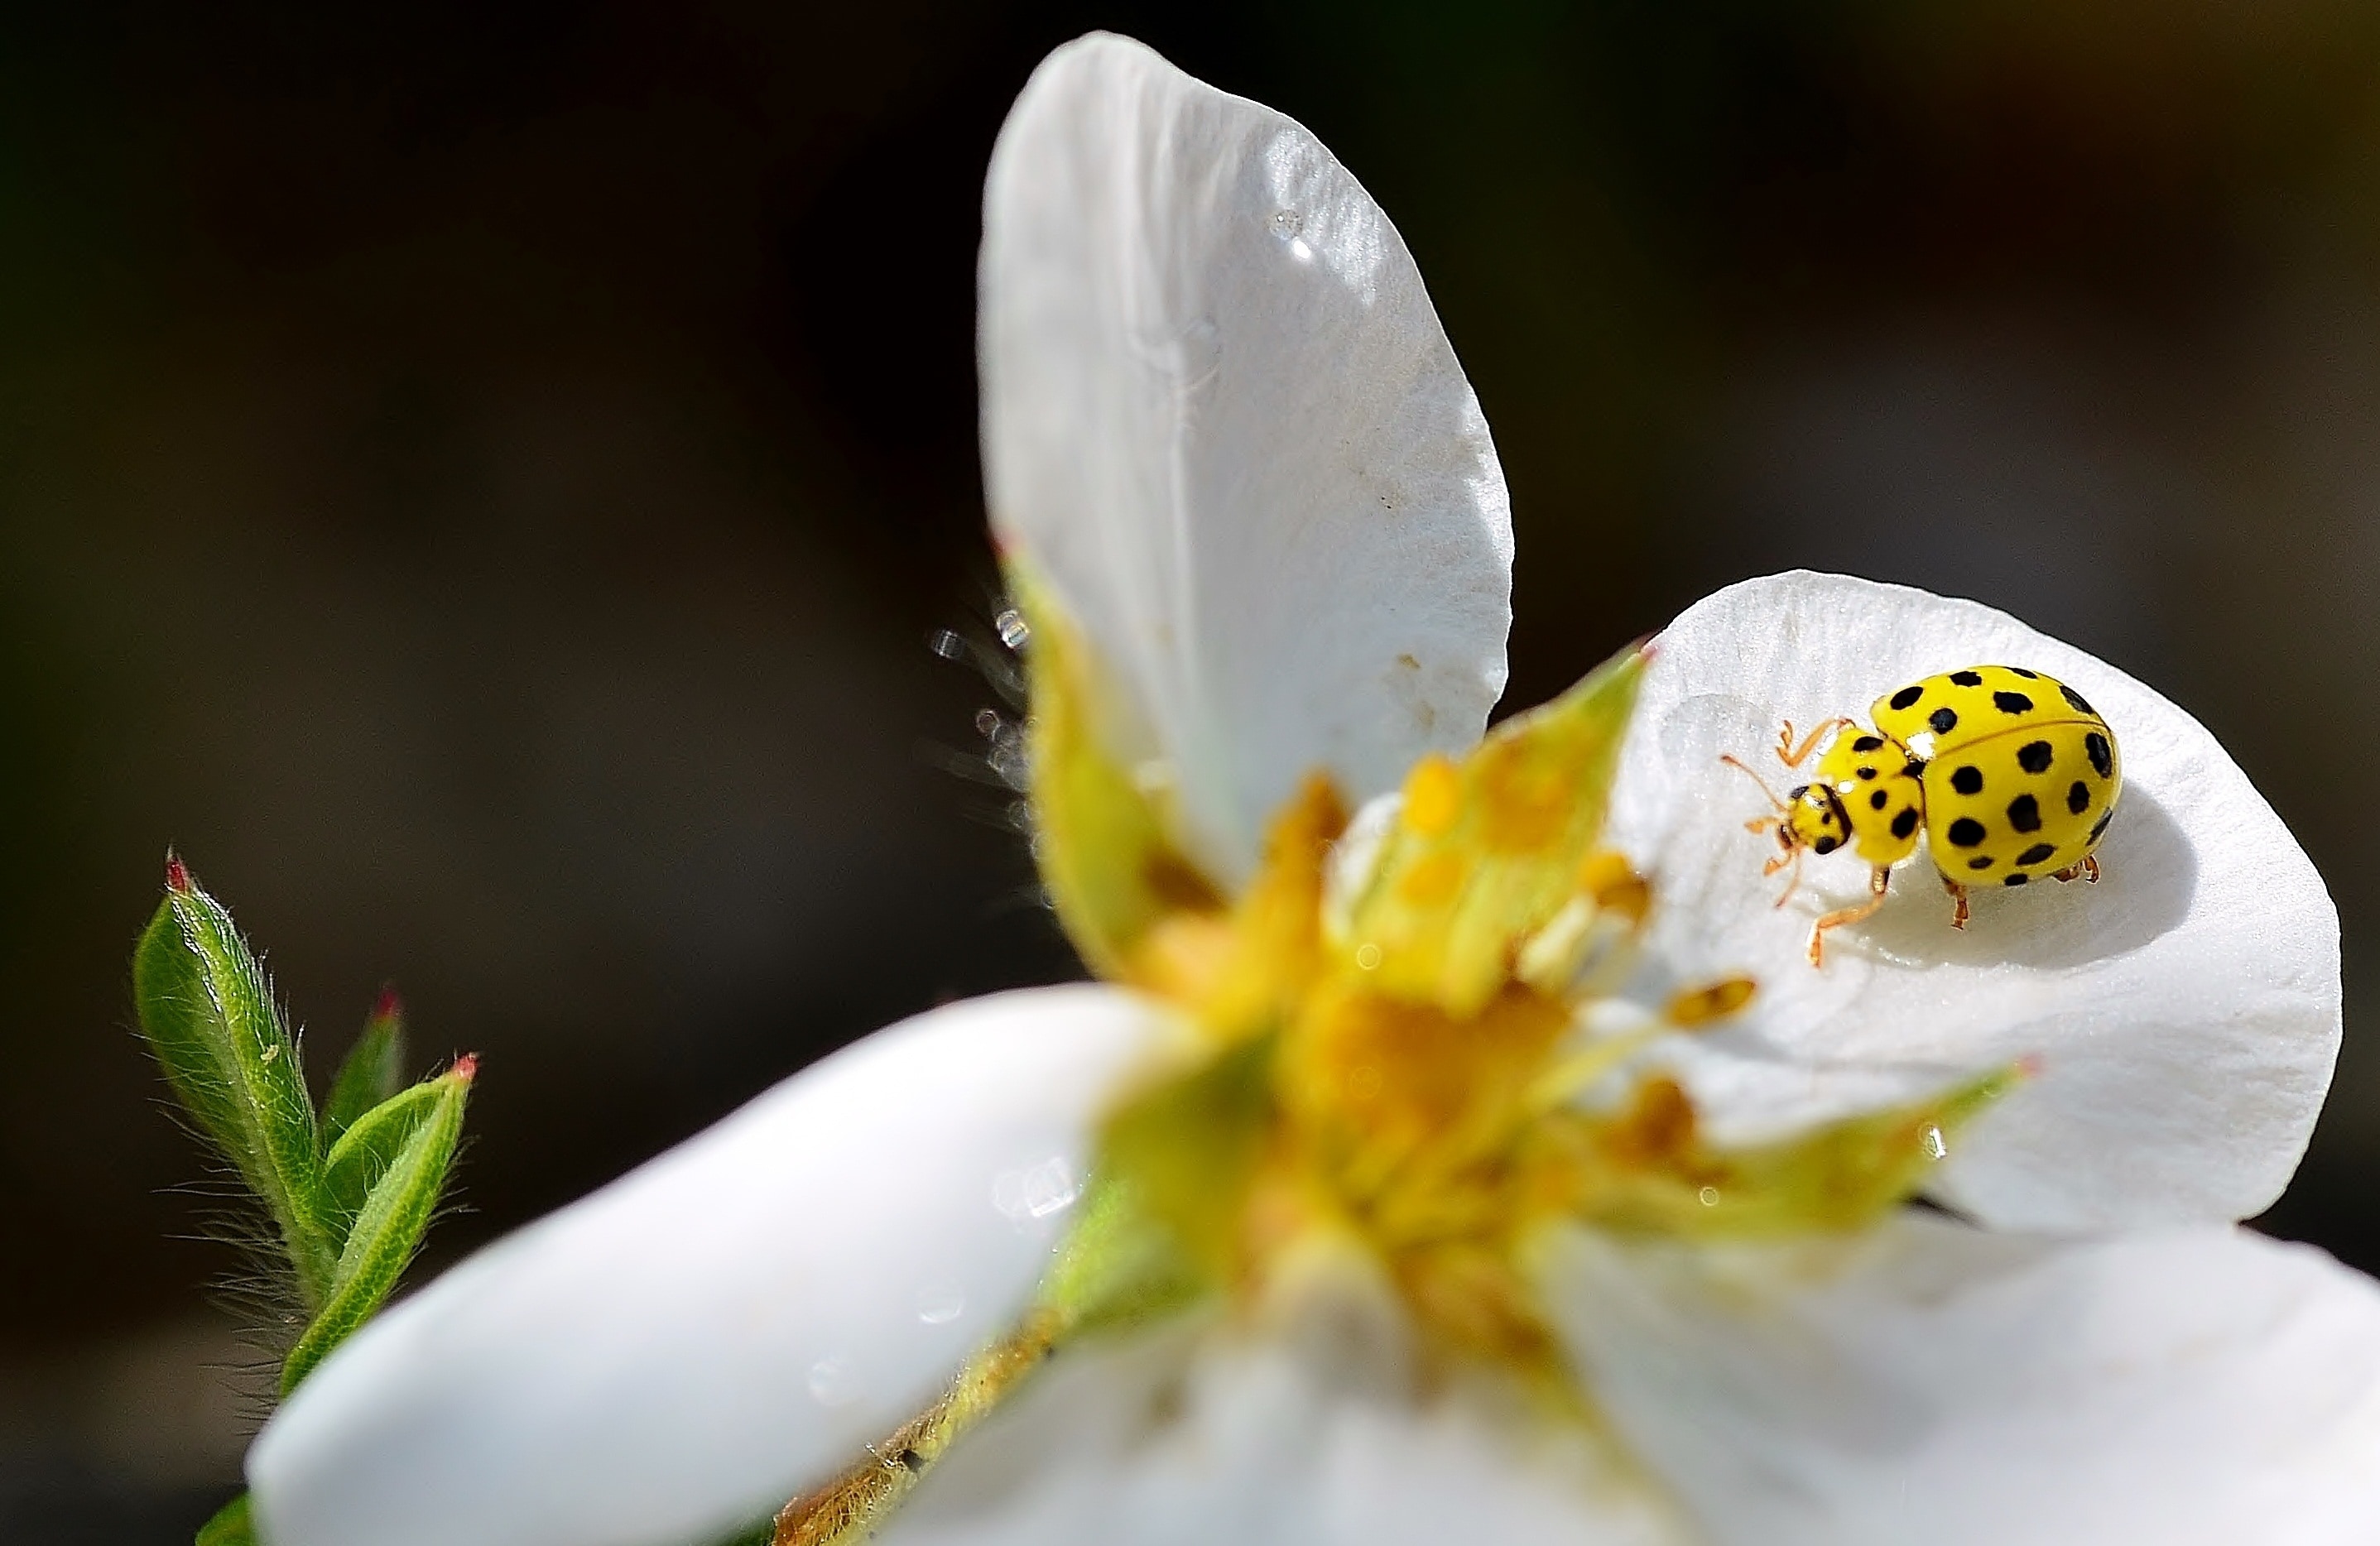 Beetle, Yellow, Spotted, Insect, flower, one animal